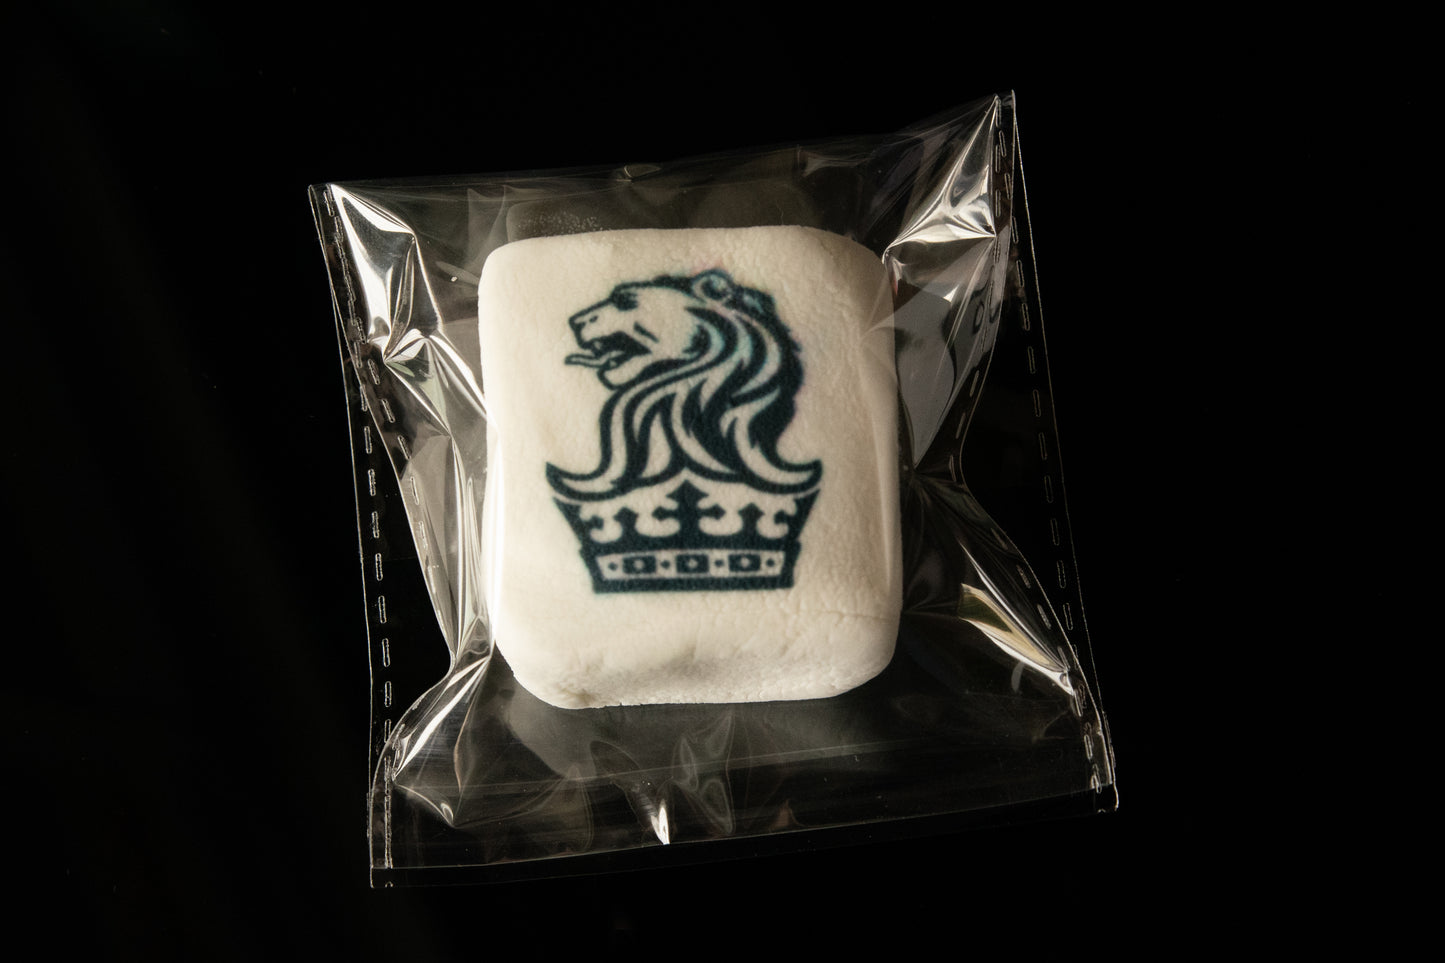 Custom Logo Marshmallow Box for Corporate Events, Company Branding, and Client Gifts